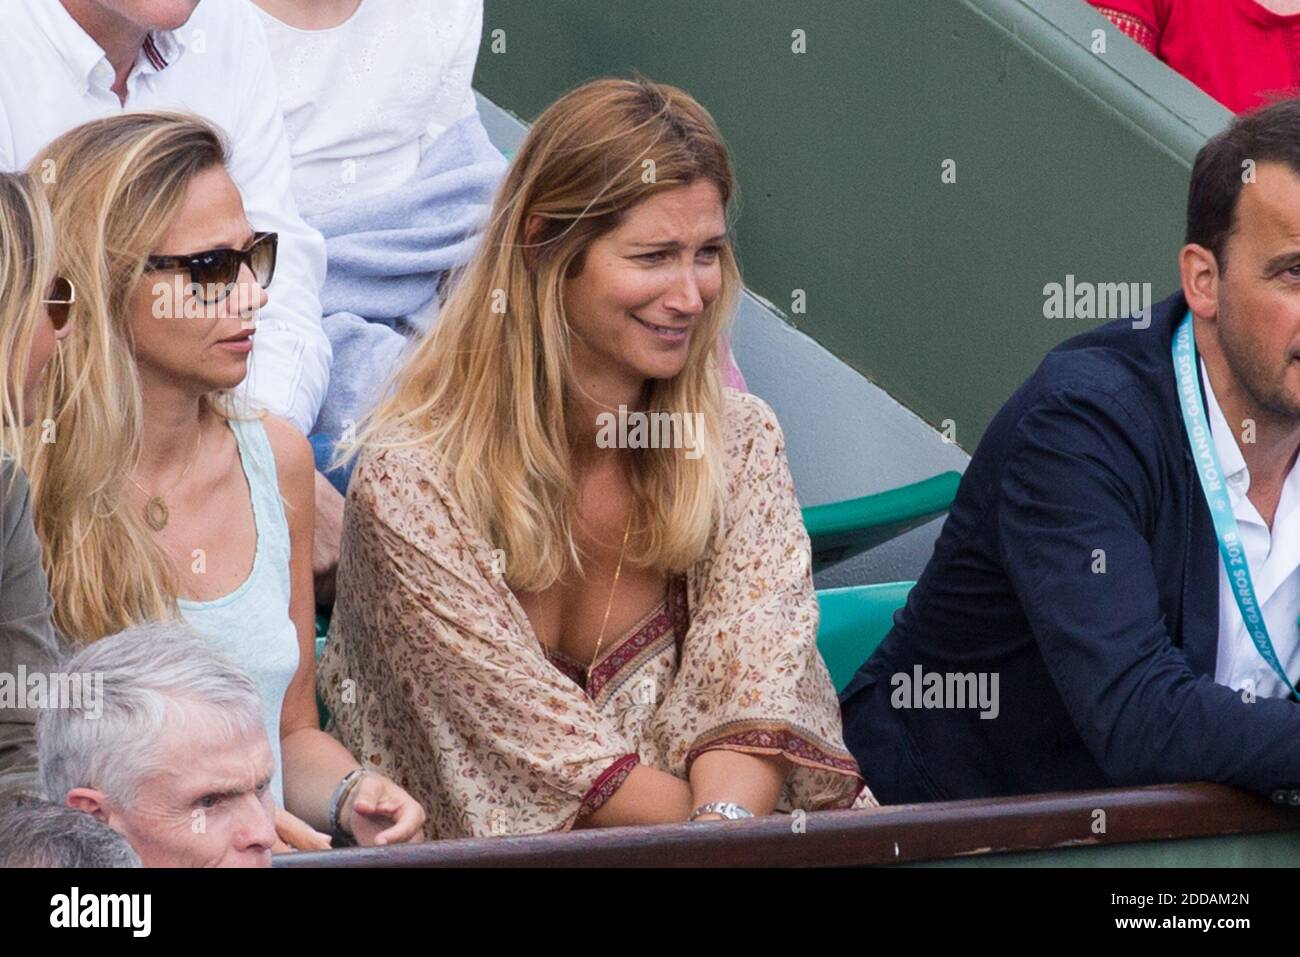 Karen Benneteau, Julien Benneteau's wife during French Tennis Open at  Roland-Garros arena on May 31, 2018 in Paris, France. Photo by Nasser  Berzane/ABACAPRESS.COM Stock Photo - Alamy